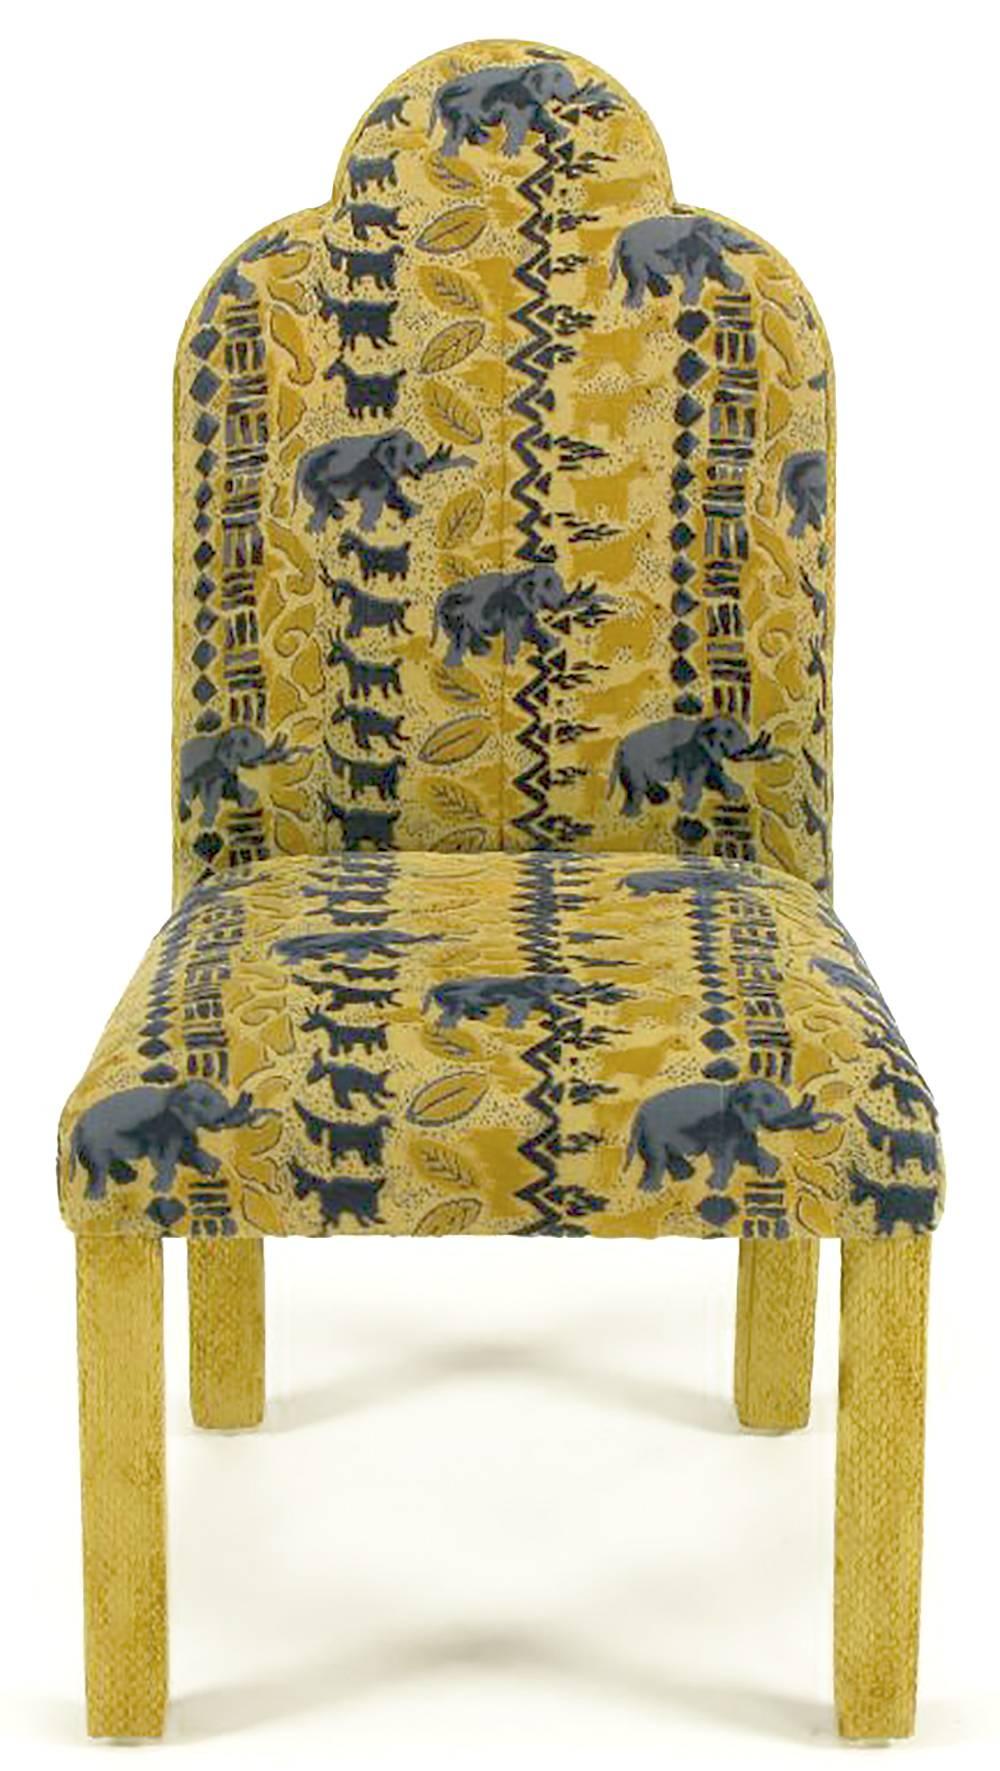 Set of four game or dining table triple arch back deco revival fully upholstered side chairs. Cover in gold, saffron and blue print chenille fabric, with African inspired characters, such as elephants, ibix and patterns. Sold with set of seven